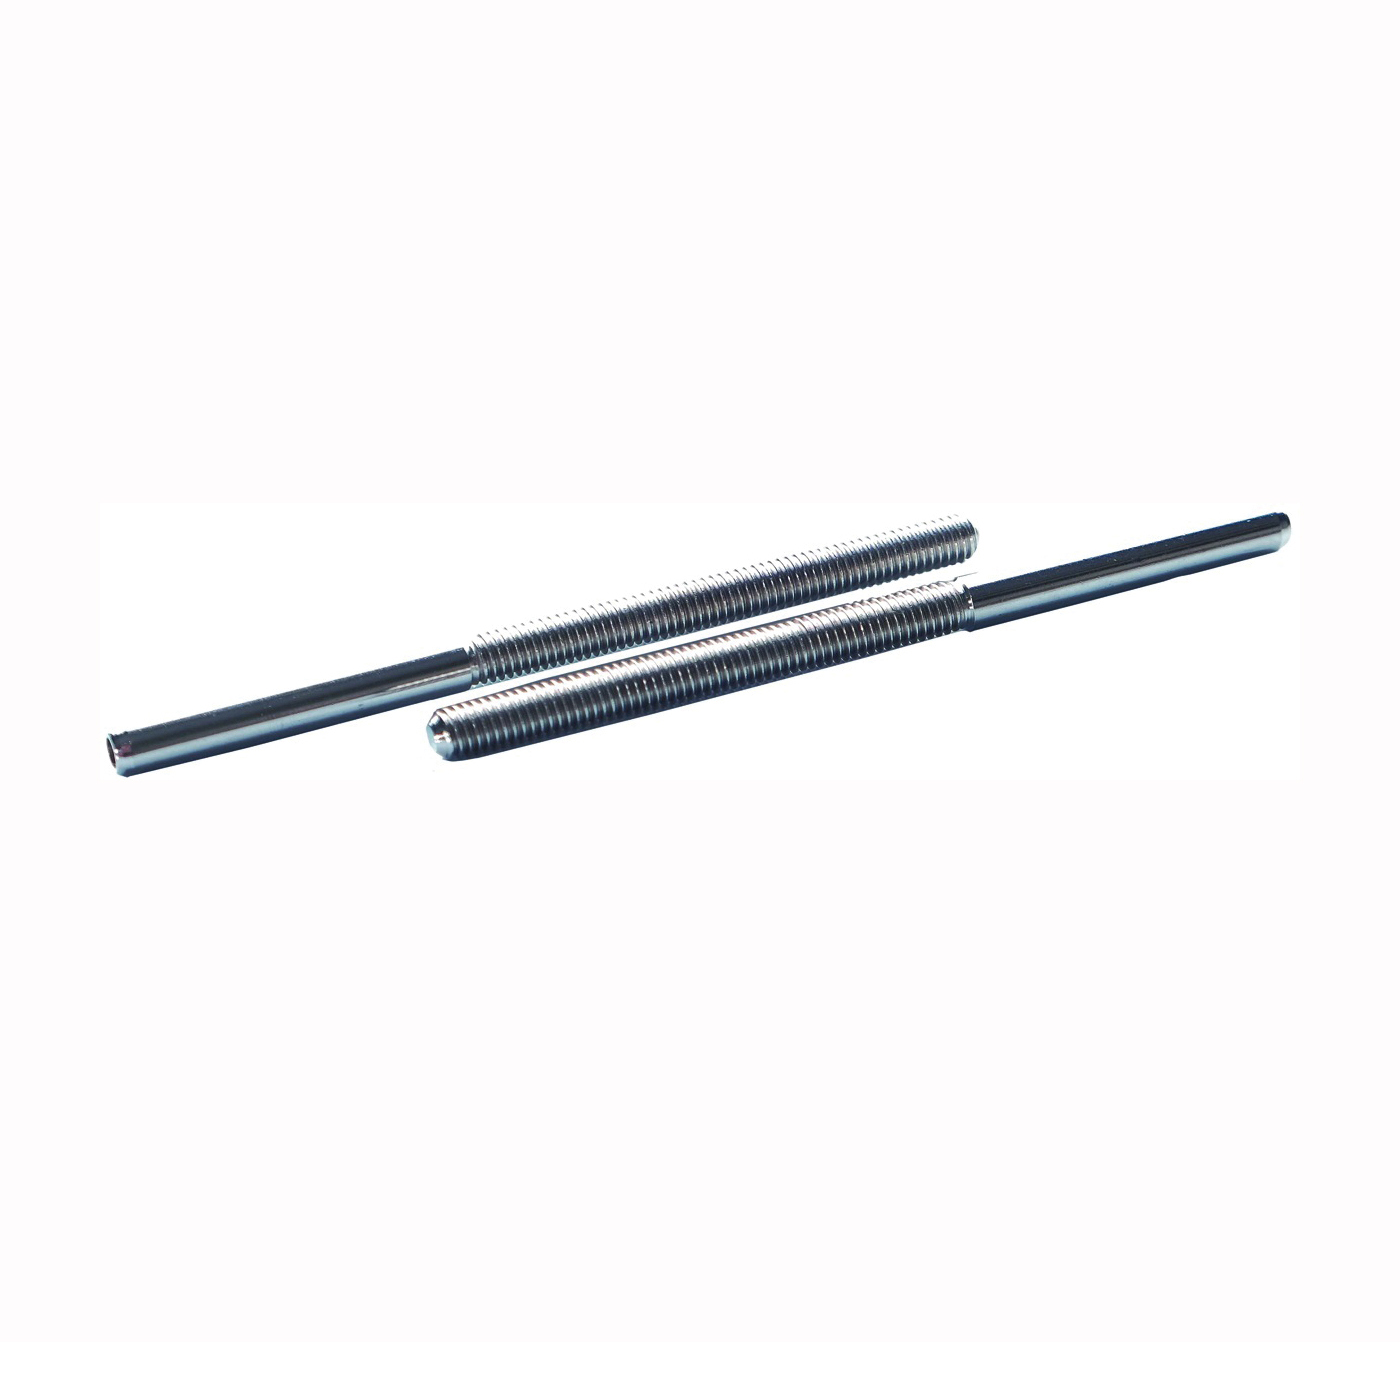 RT TS-05 Swage Stud, For: 3 mm Wire Rope